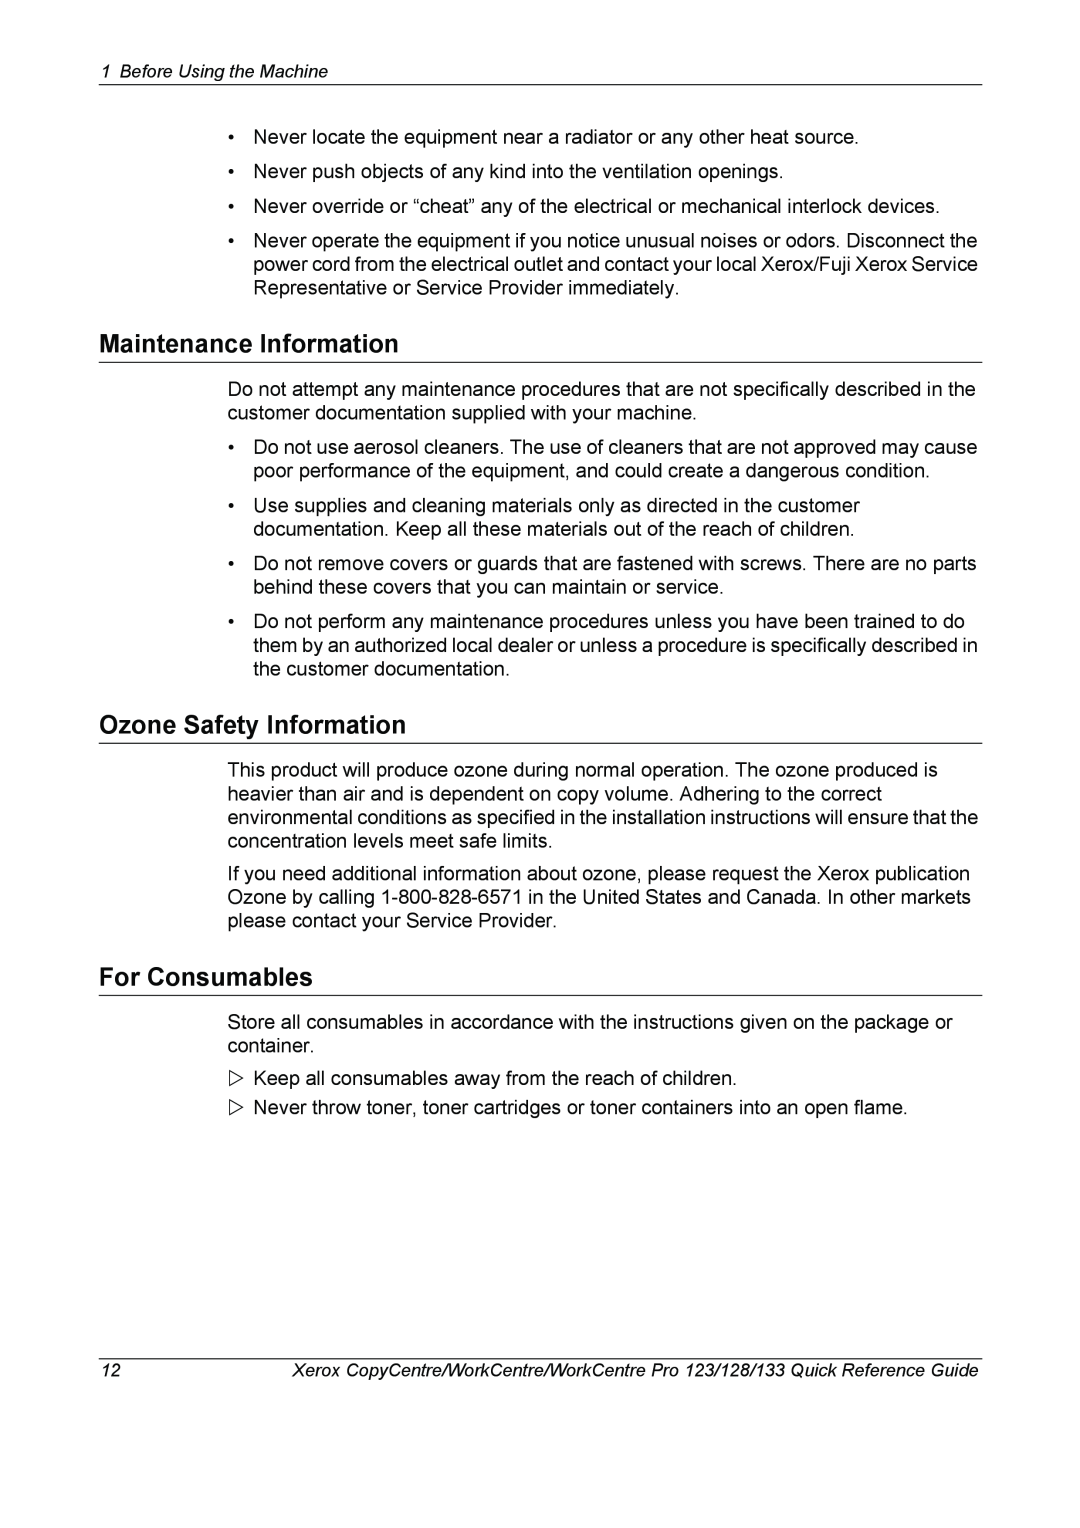 Xerox 604P18037 manual Maintenance Information, Ozone Safety Information, For Consumables 